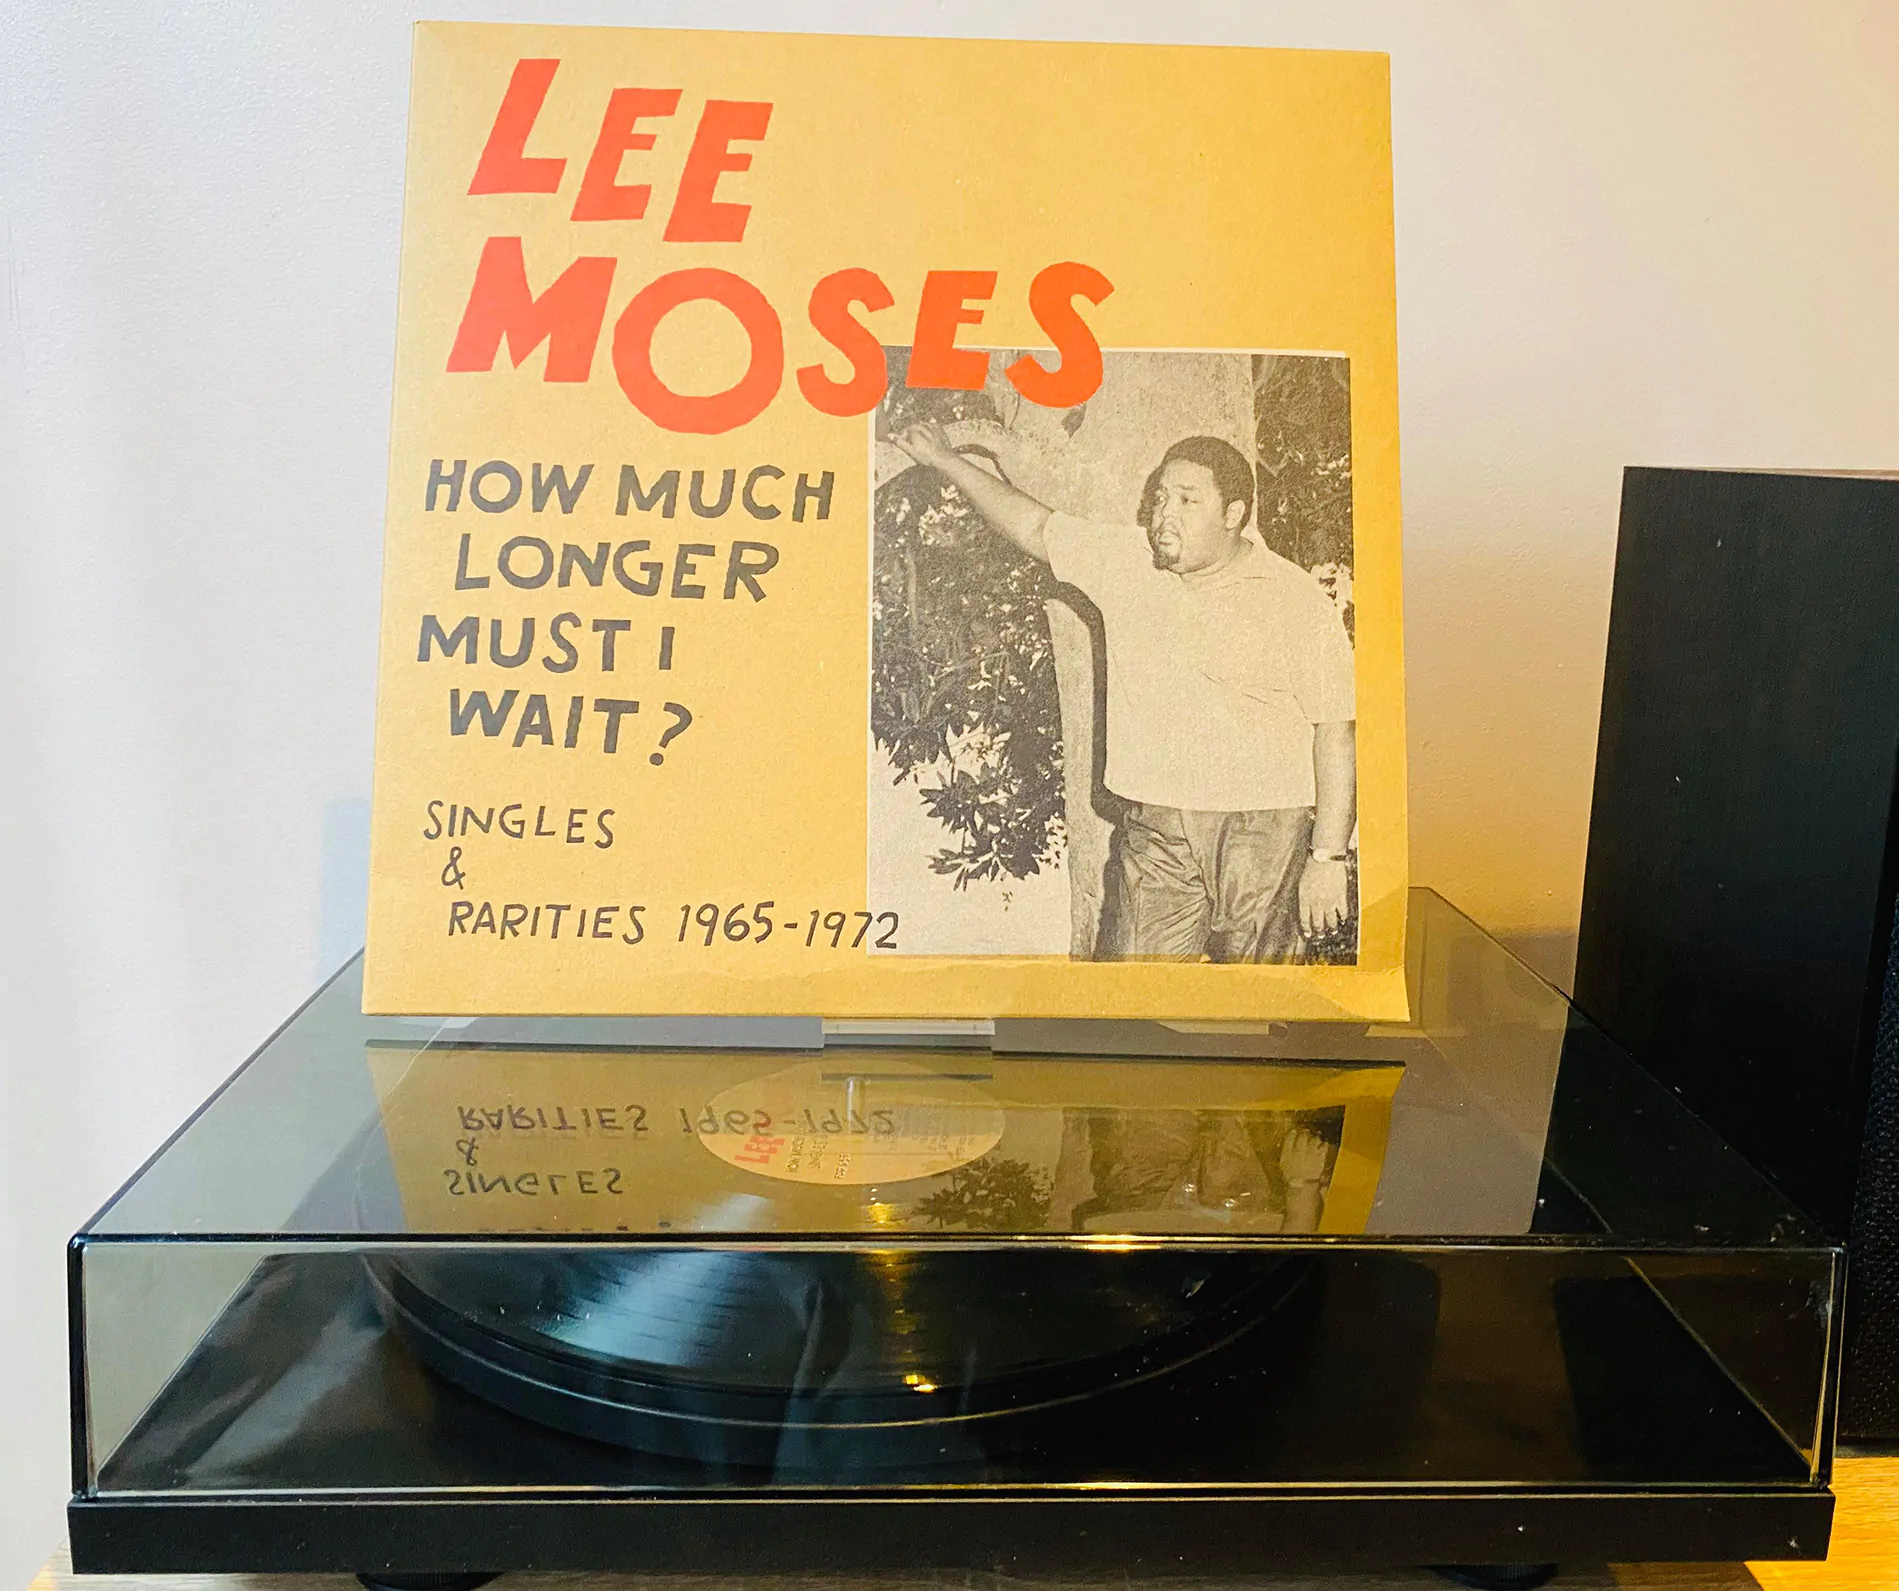 ON THE TURNTABLE: Lee Moses – How Much Longer Must I Wait? : Singles & Rarities 1965 – 1972